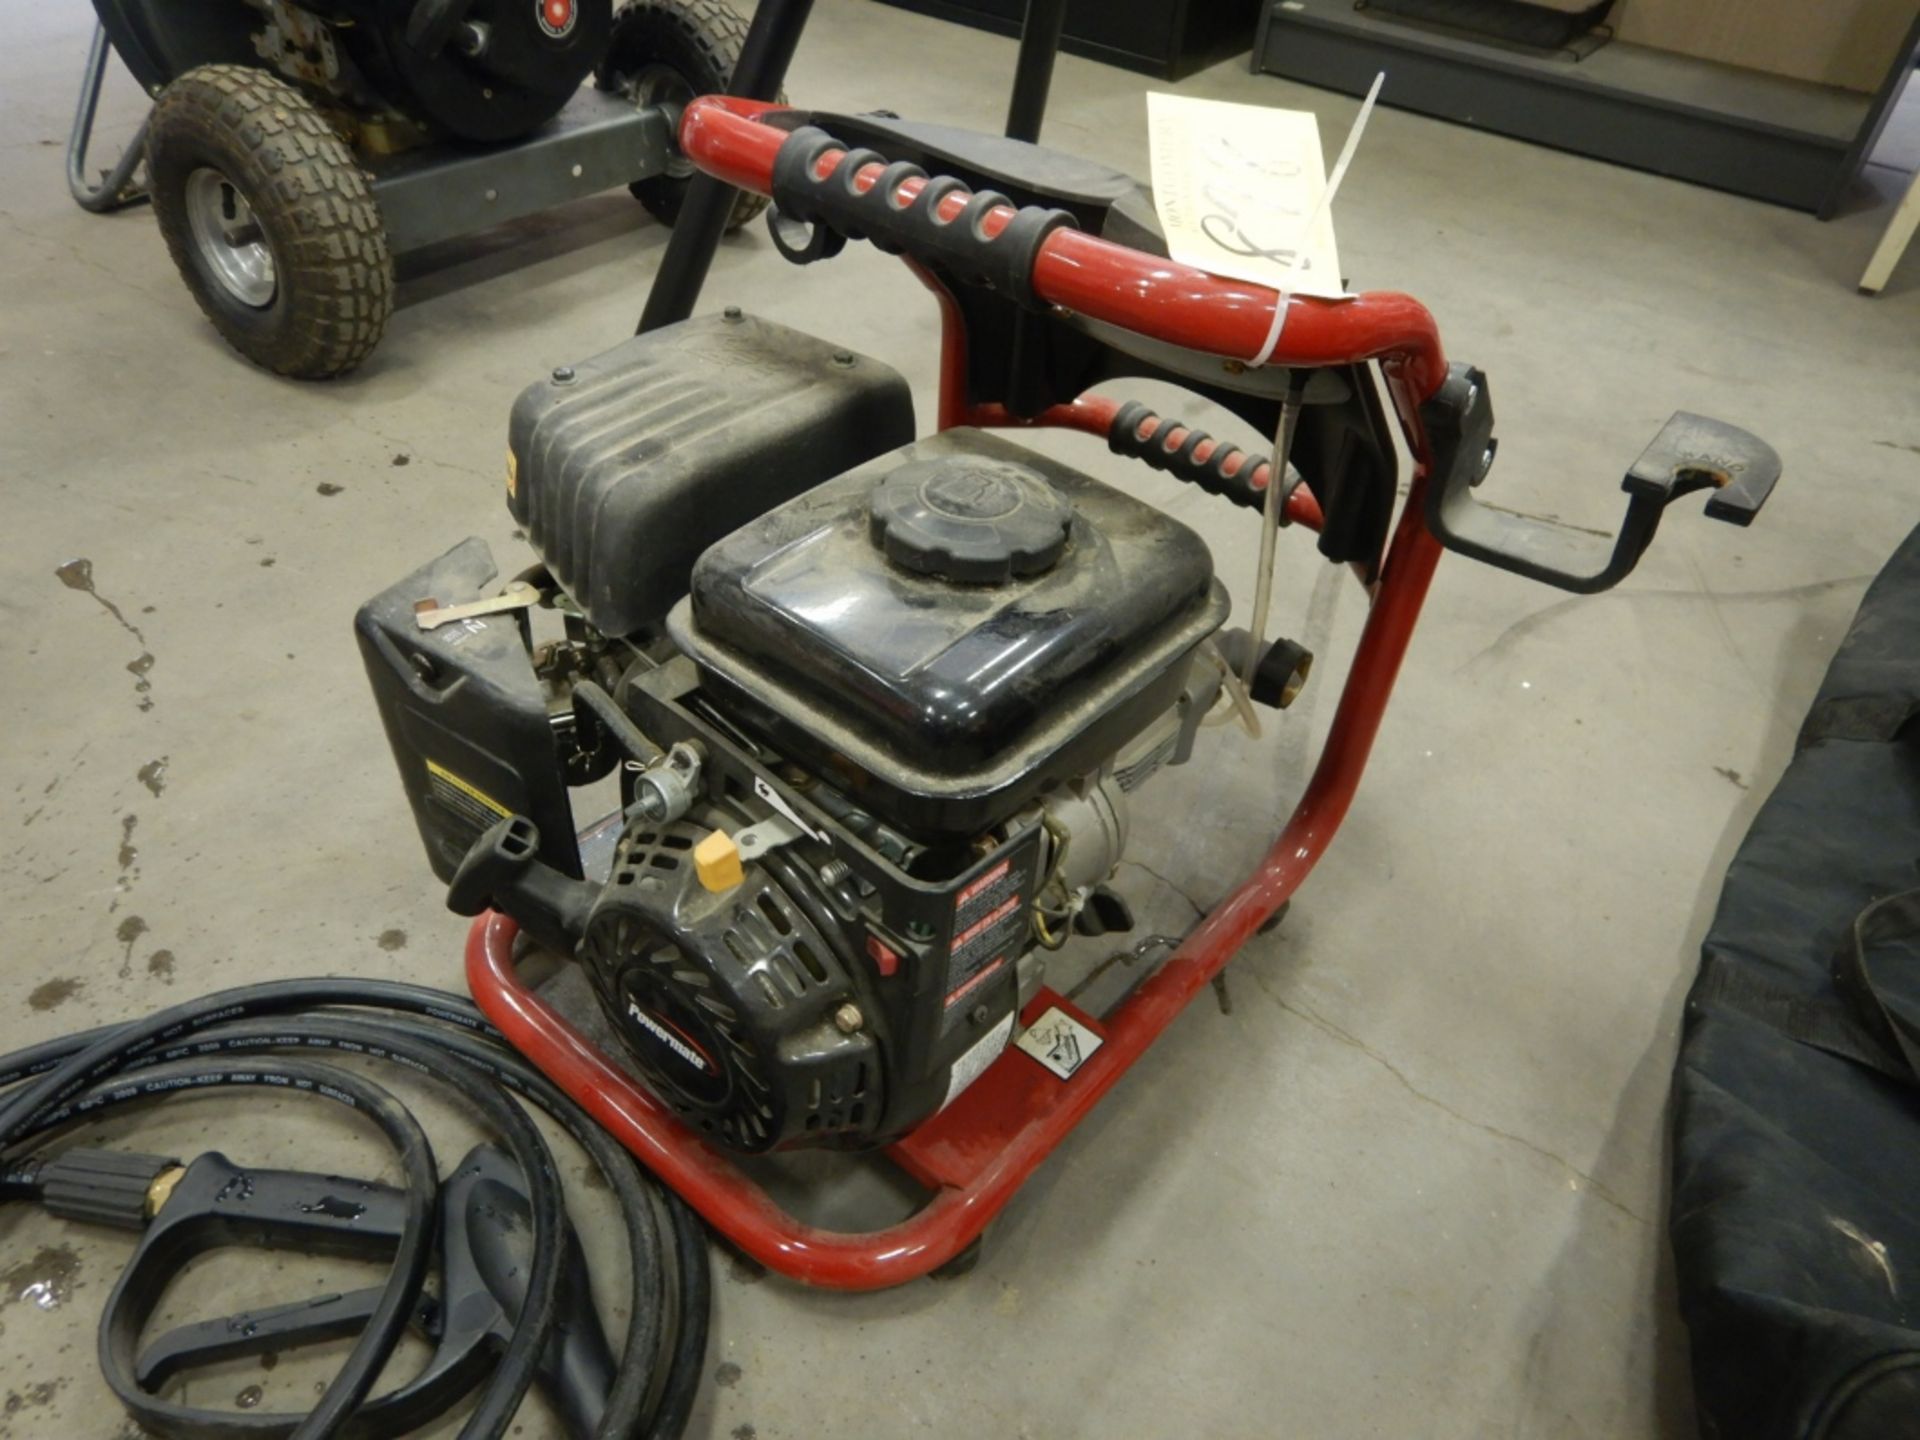 POWER MATE 1600 PSI X 1.5 GPM PRESSURE WASHER, MODEL MONSOON - Image 2 of 5